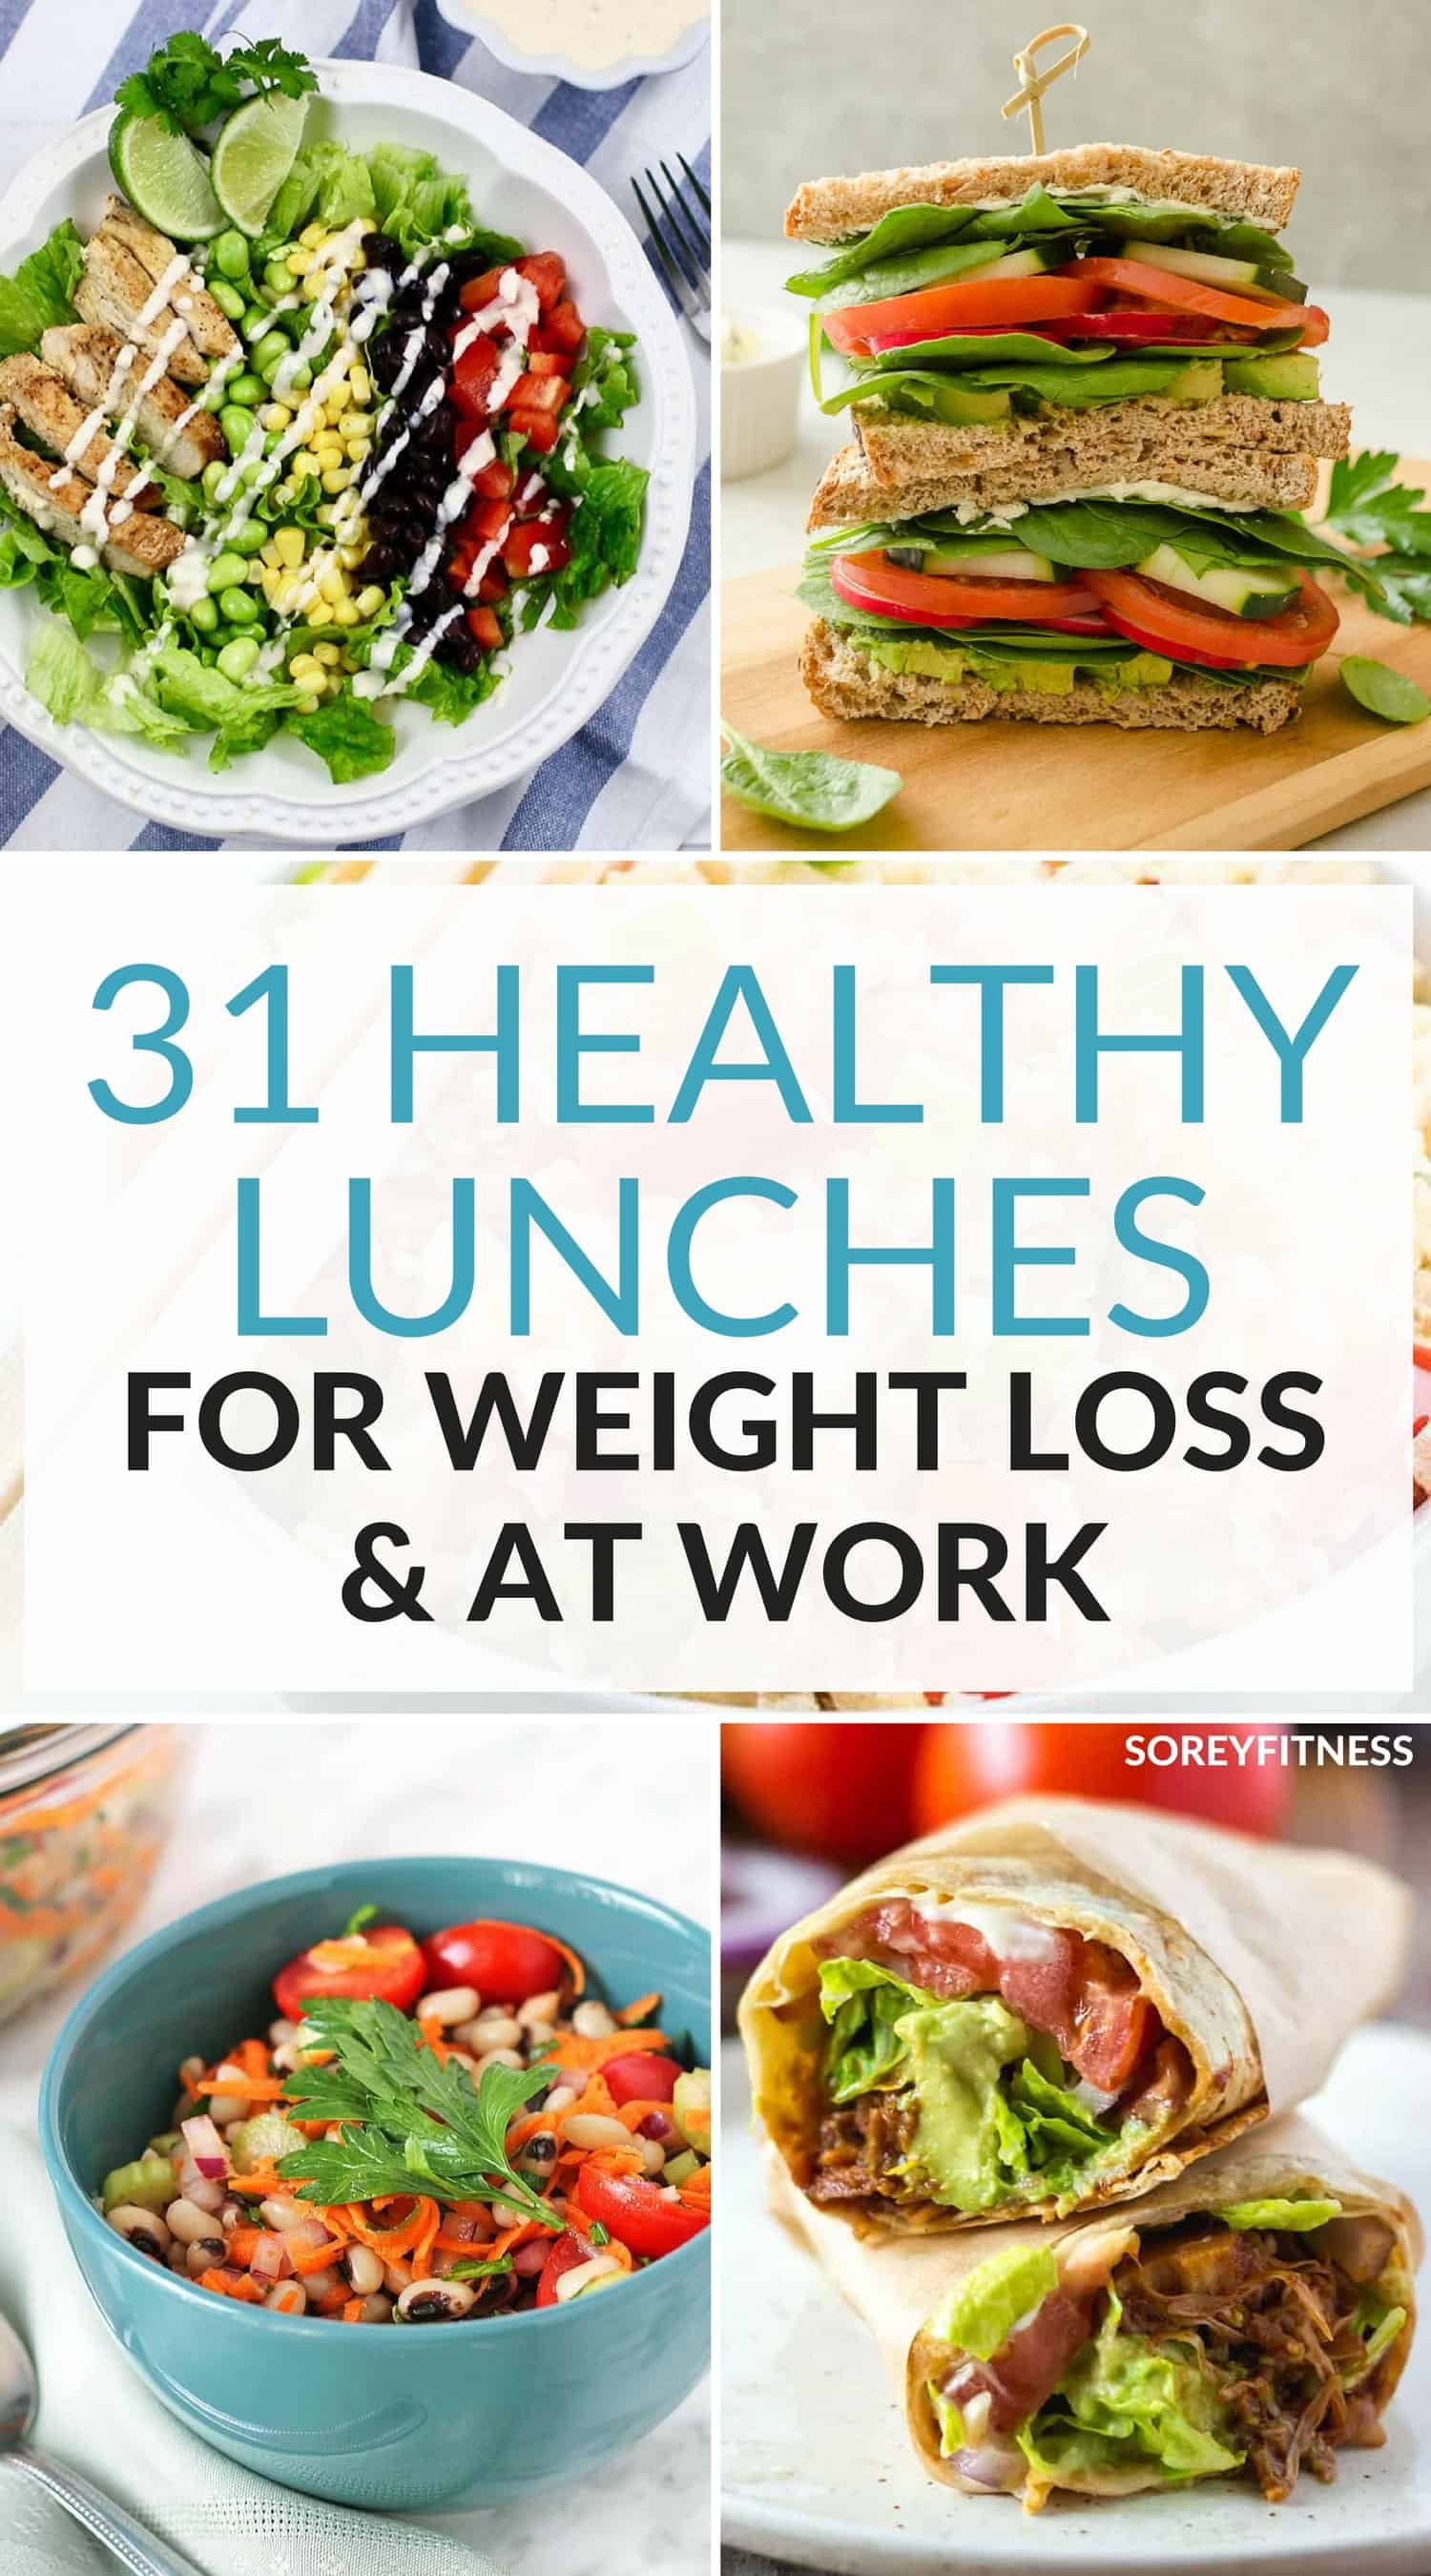 31 healthy lunch ideas for weight loss while at work